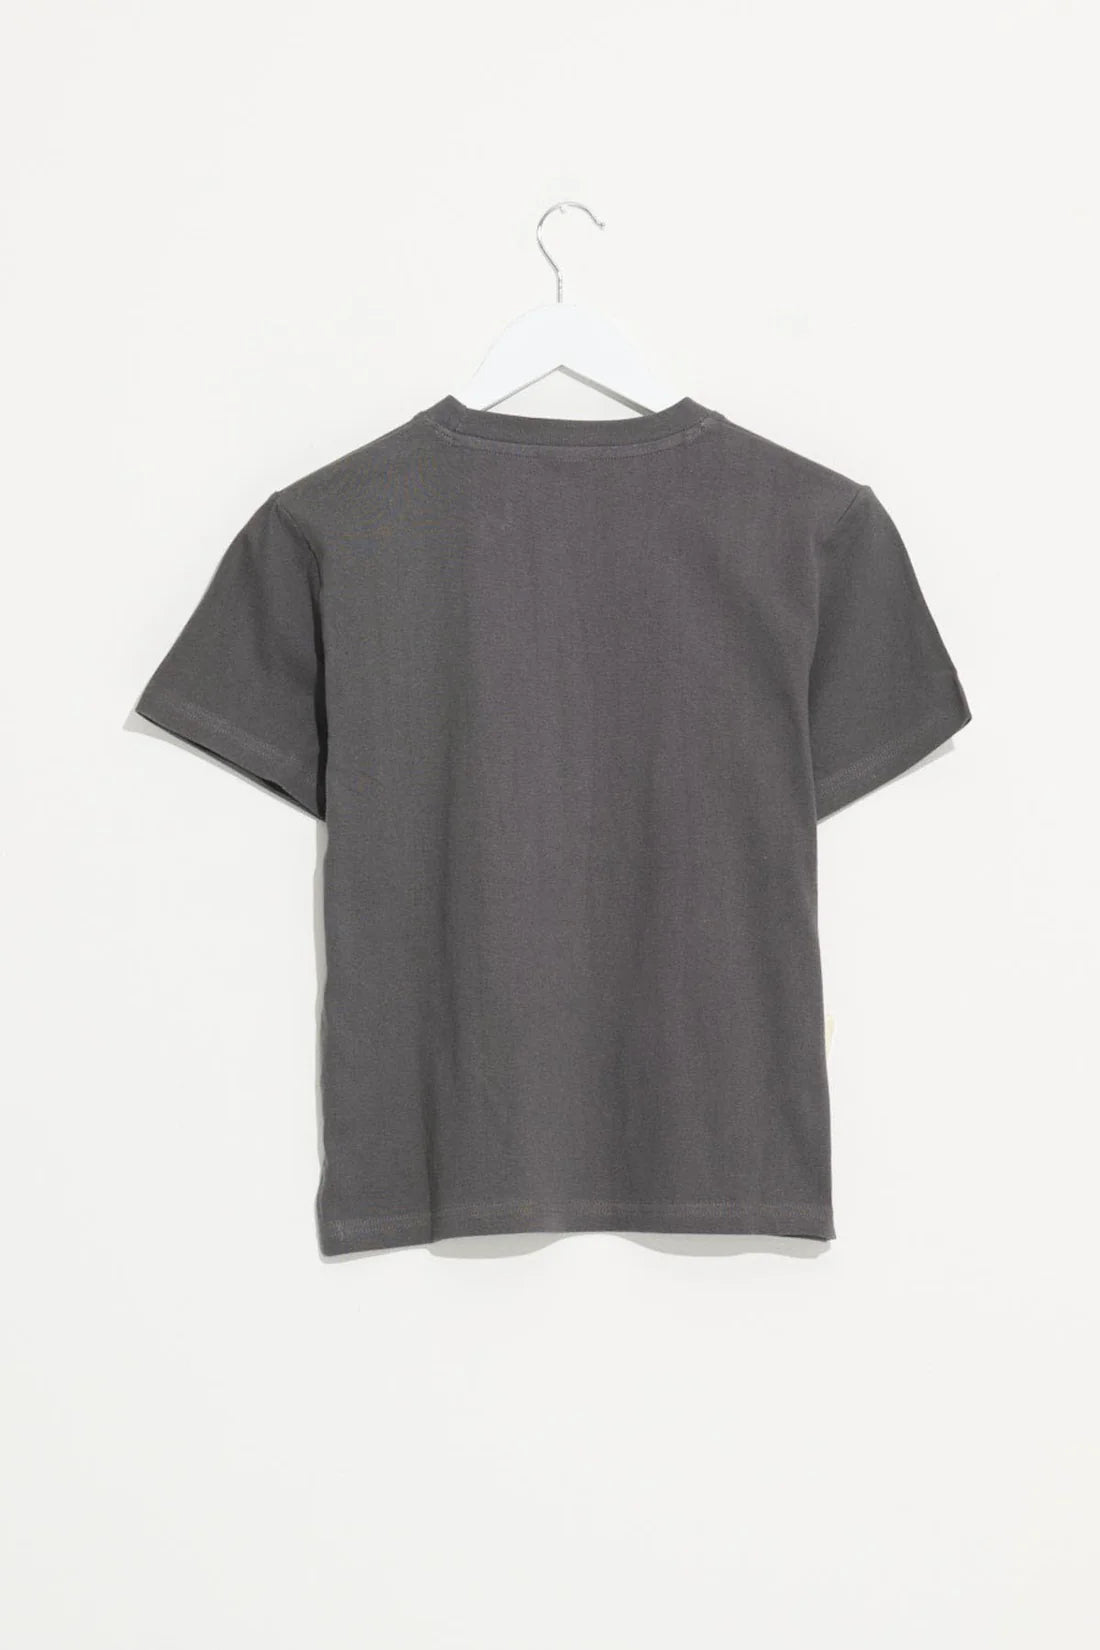 MISFIT // Forest Friends Baby Tee CHARCOAL